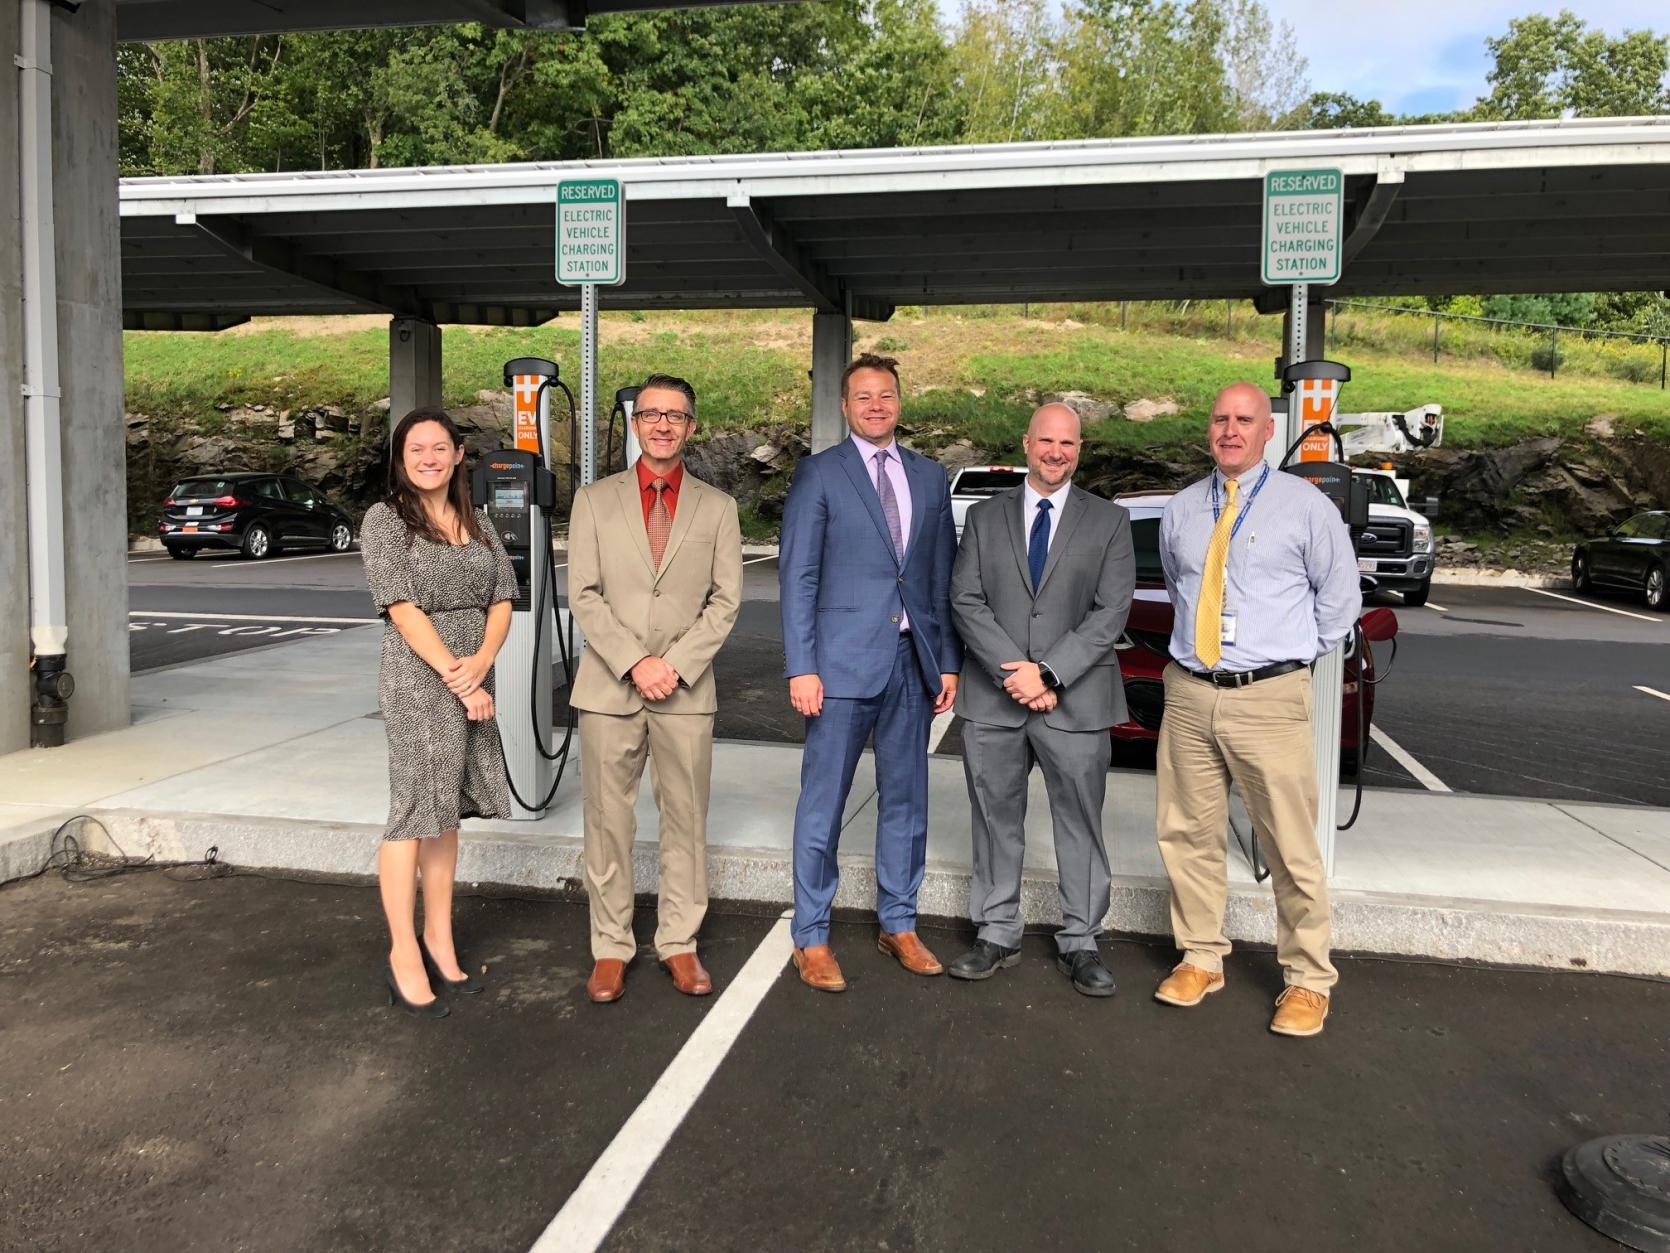 Department of Energy Resources Deputy Director of LBE Catie Snyder, MassDOT District 3 Highway Director Barry Lorion, Department of Energy Resources Commissioner Patrick Woodcock, MassDOT Highway Administrator Jonathan Gulliver, and MassDOT Highway Program Manager Donald Pettey all joined at the Central MA Transportation Center in Worcester.